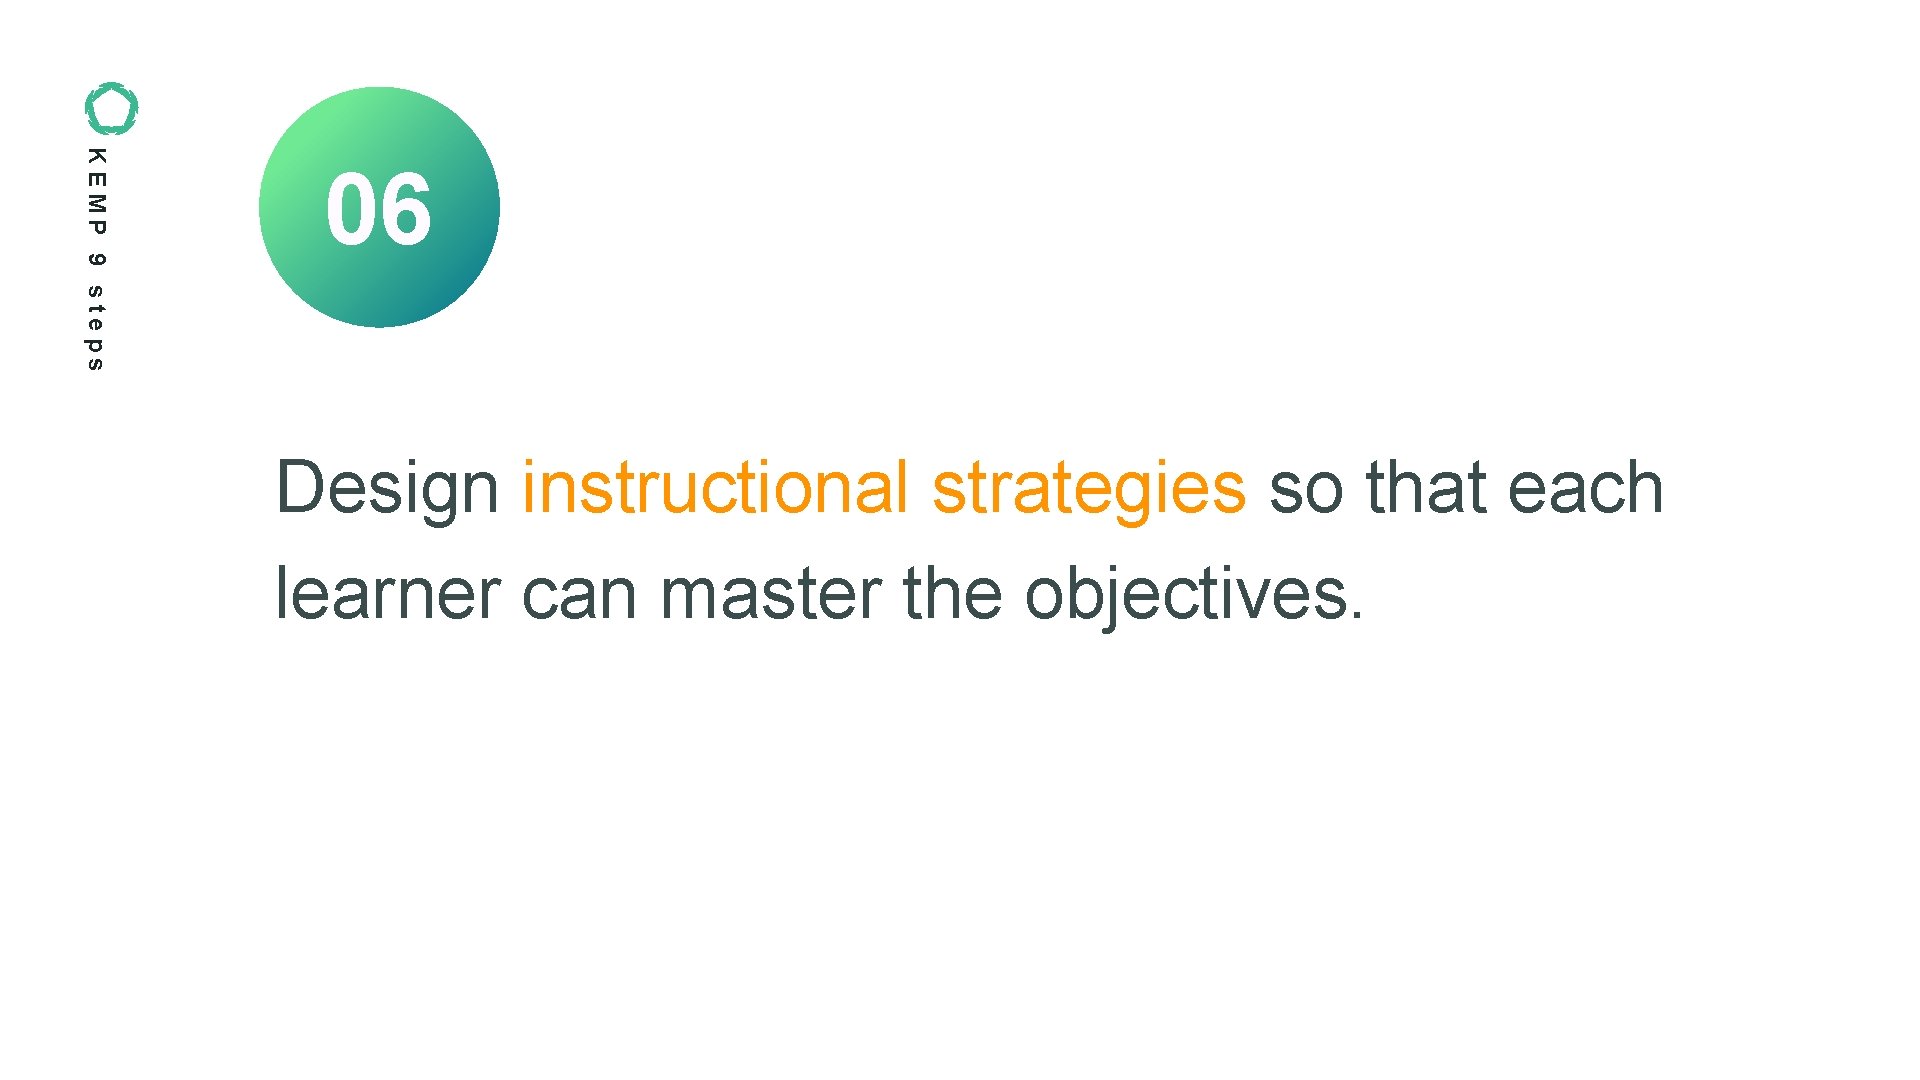 KEMP 9 steps 06 Design instructional strategies so that each learner can master the